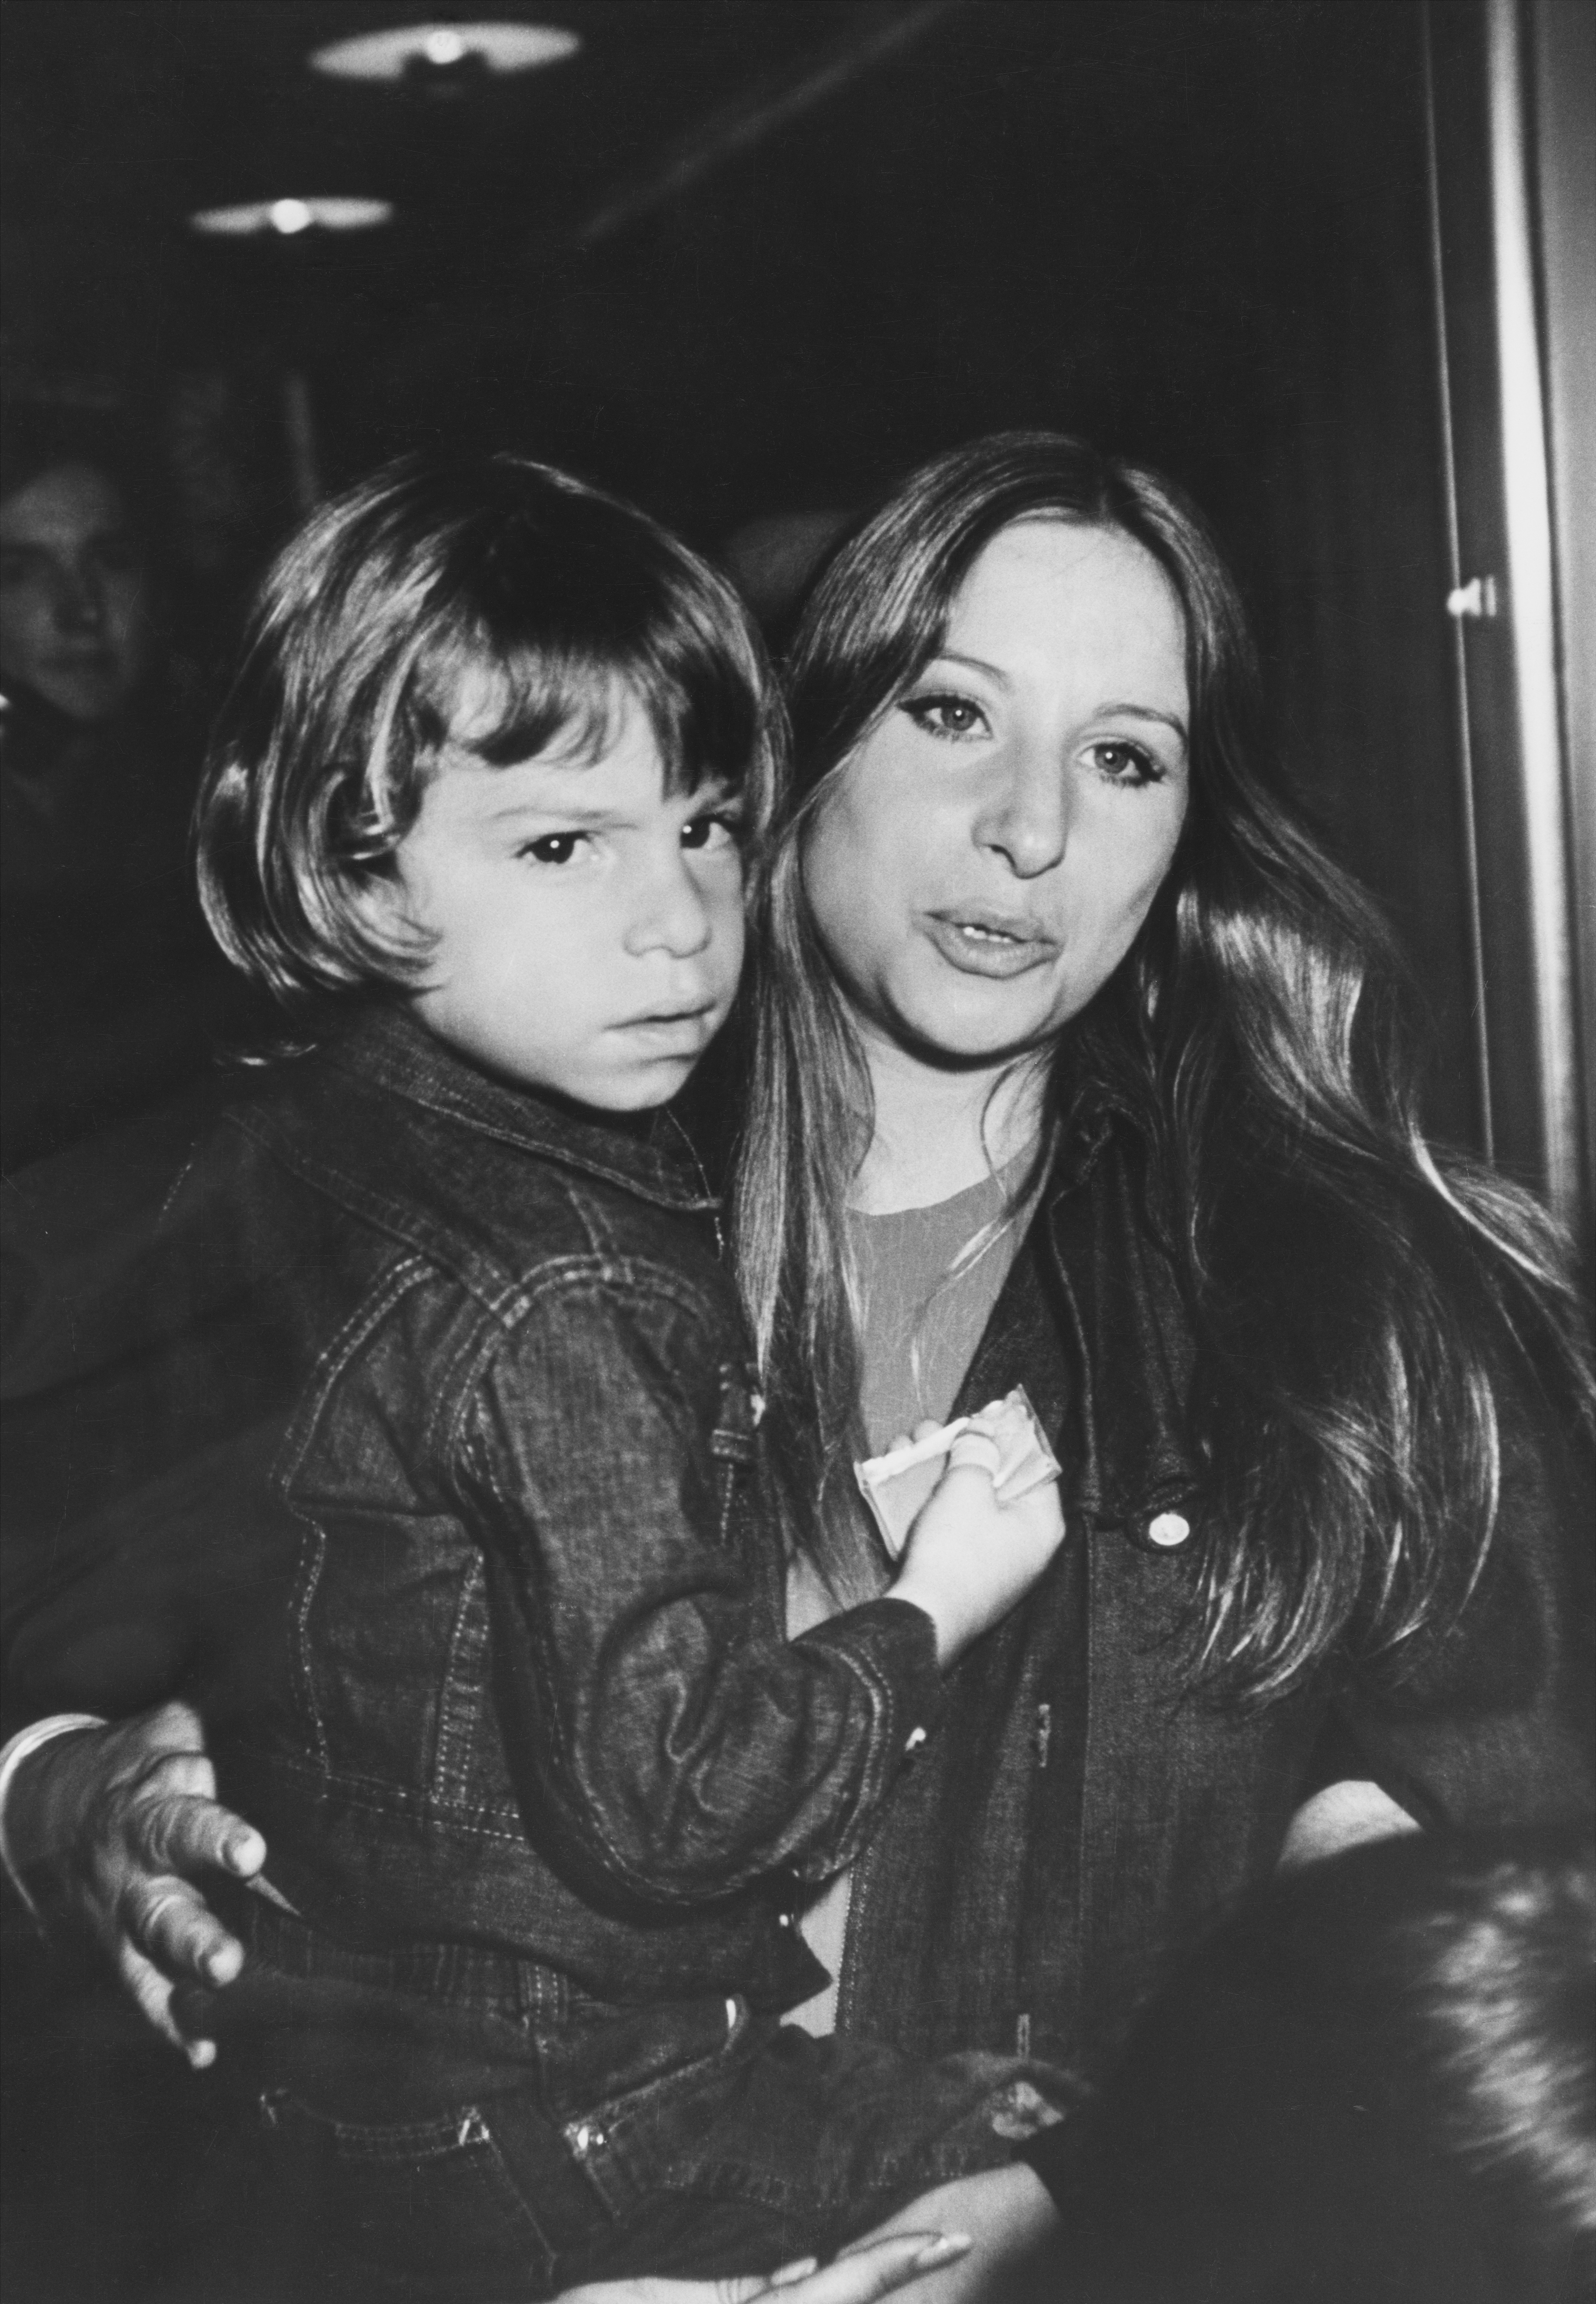 Barbra Streisand carrying her son, Jason Gould, at a screening of 'Willy Wonka & The Chocolate Factory', held at the Directors' Guild Theater, location unspecified, United States, 3rd June 1971. | Source: Getty Images